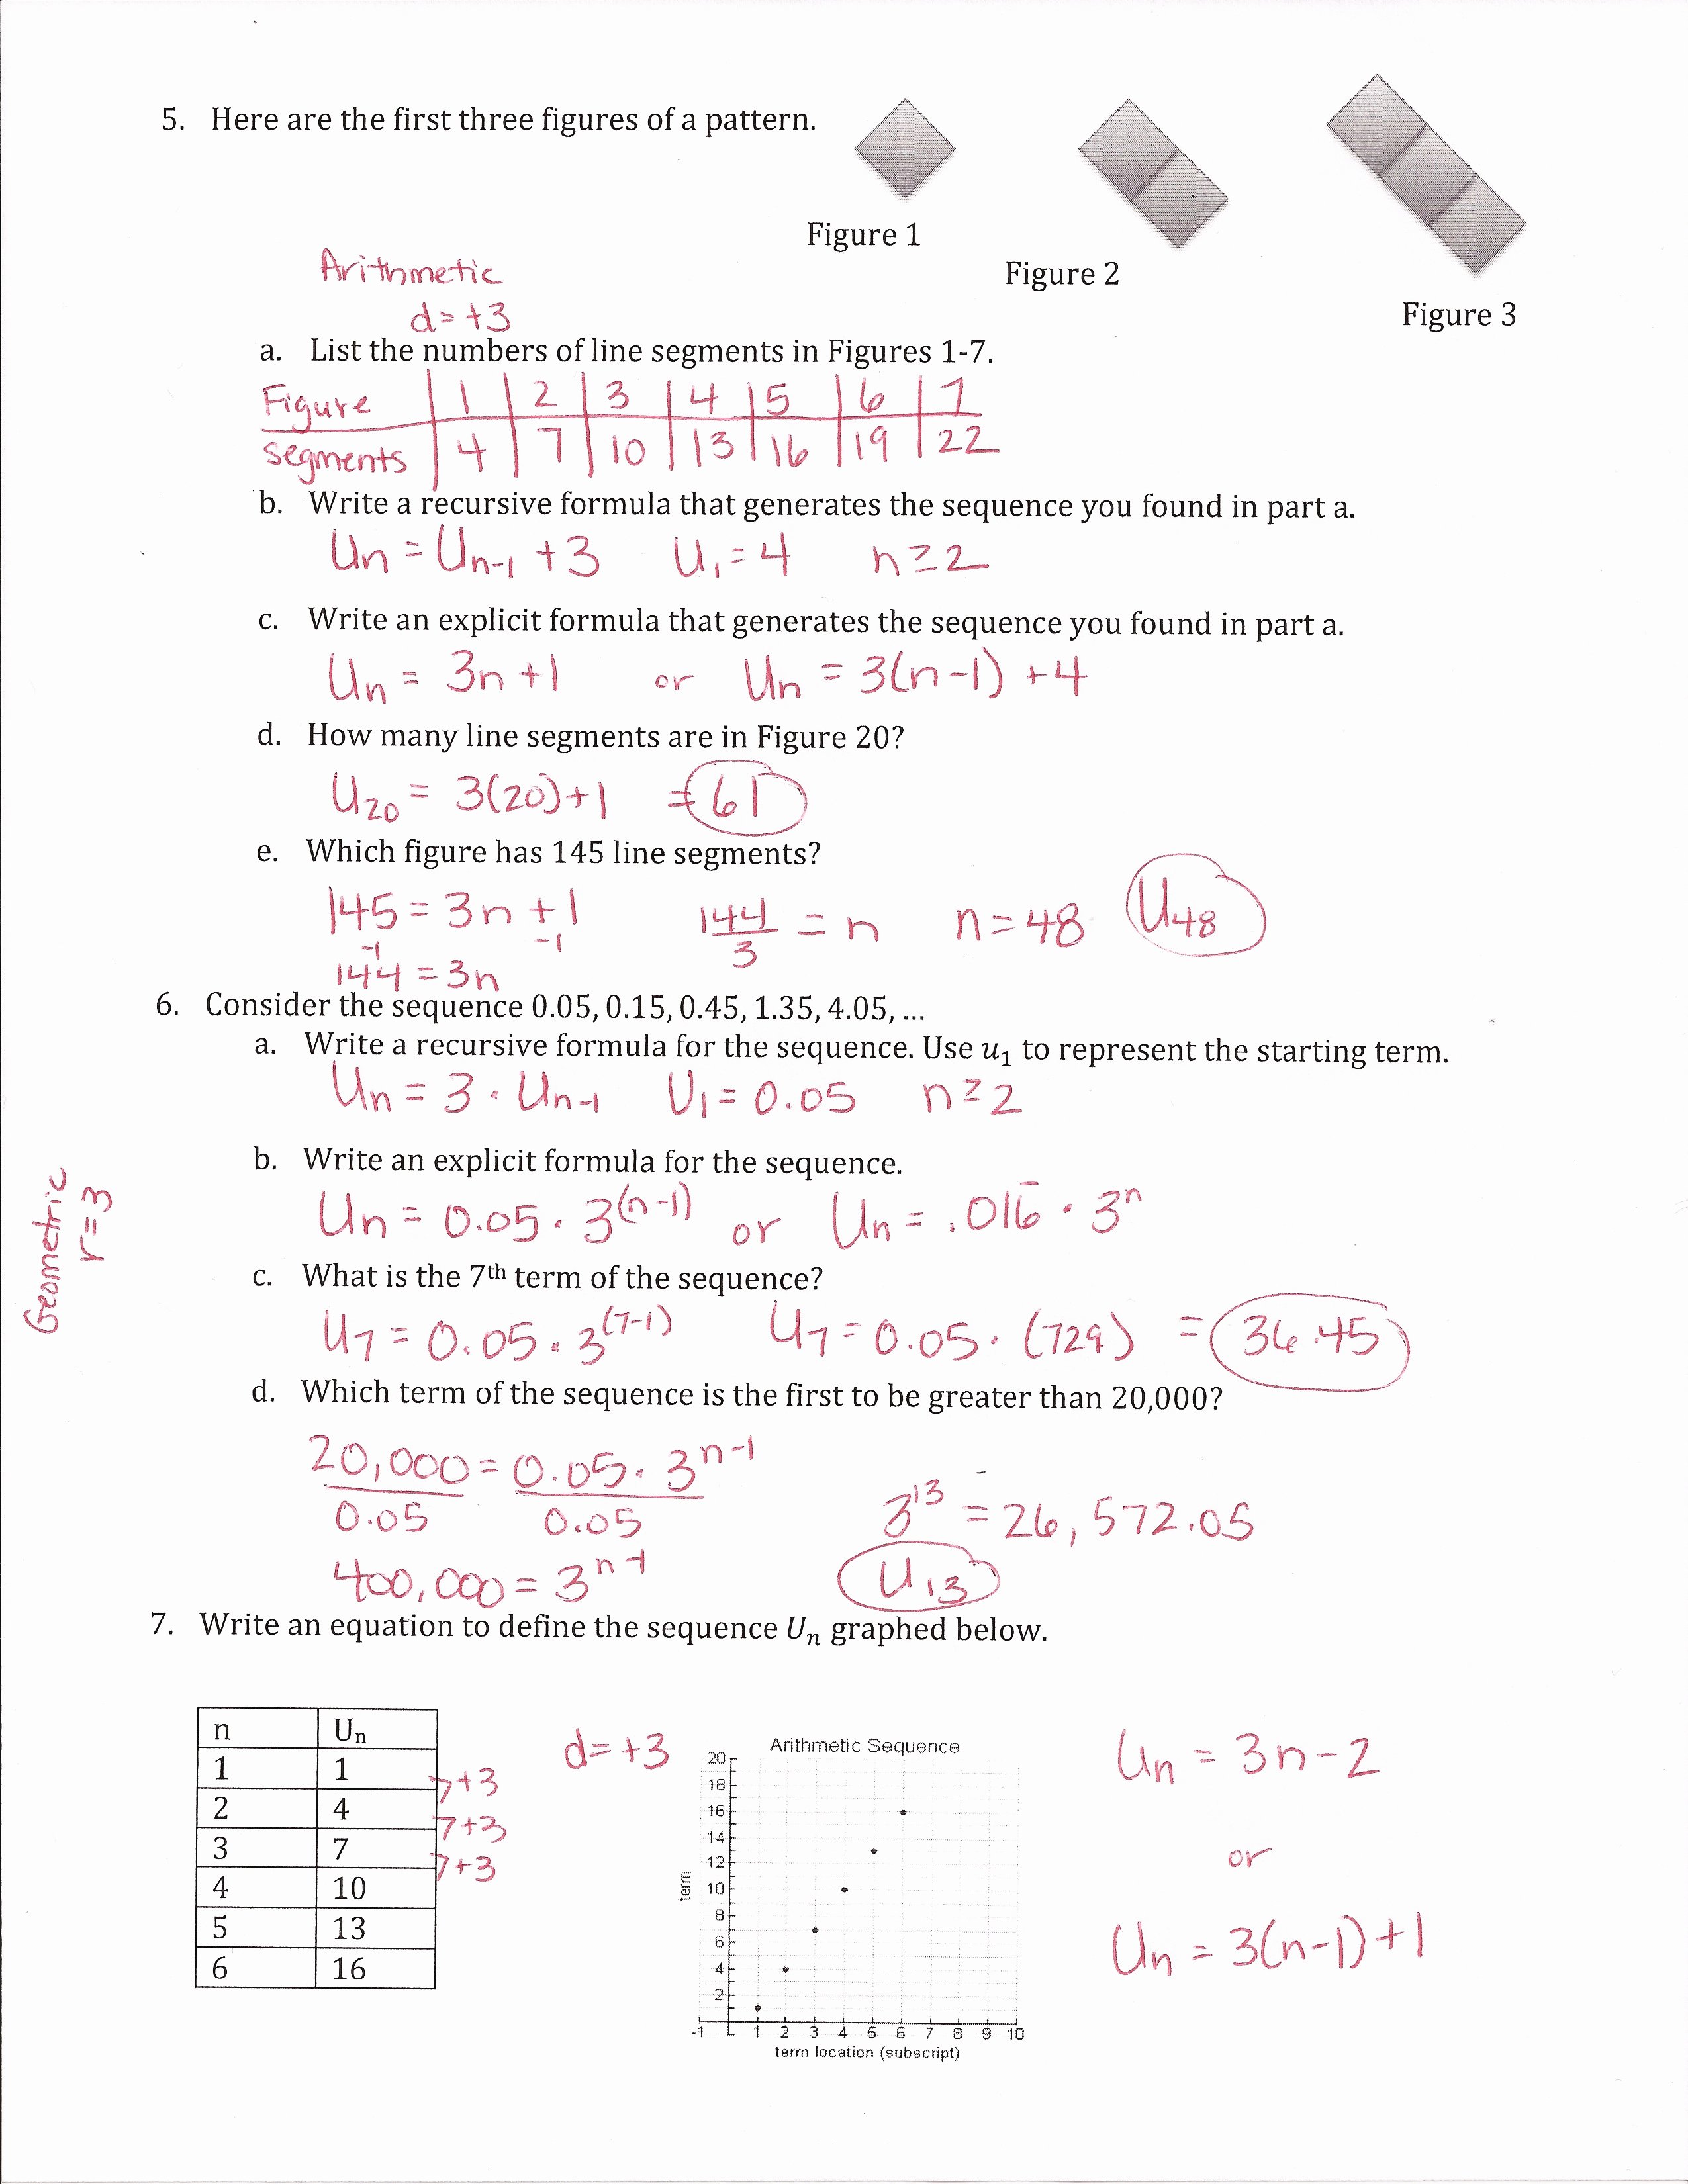 Arithmetic Sequence Worksheet Answers Awesome Dentrodabiblia Arithmetic Sequences Worksheet Answers